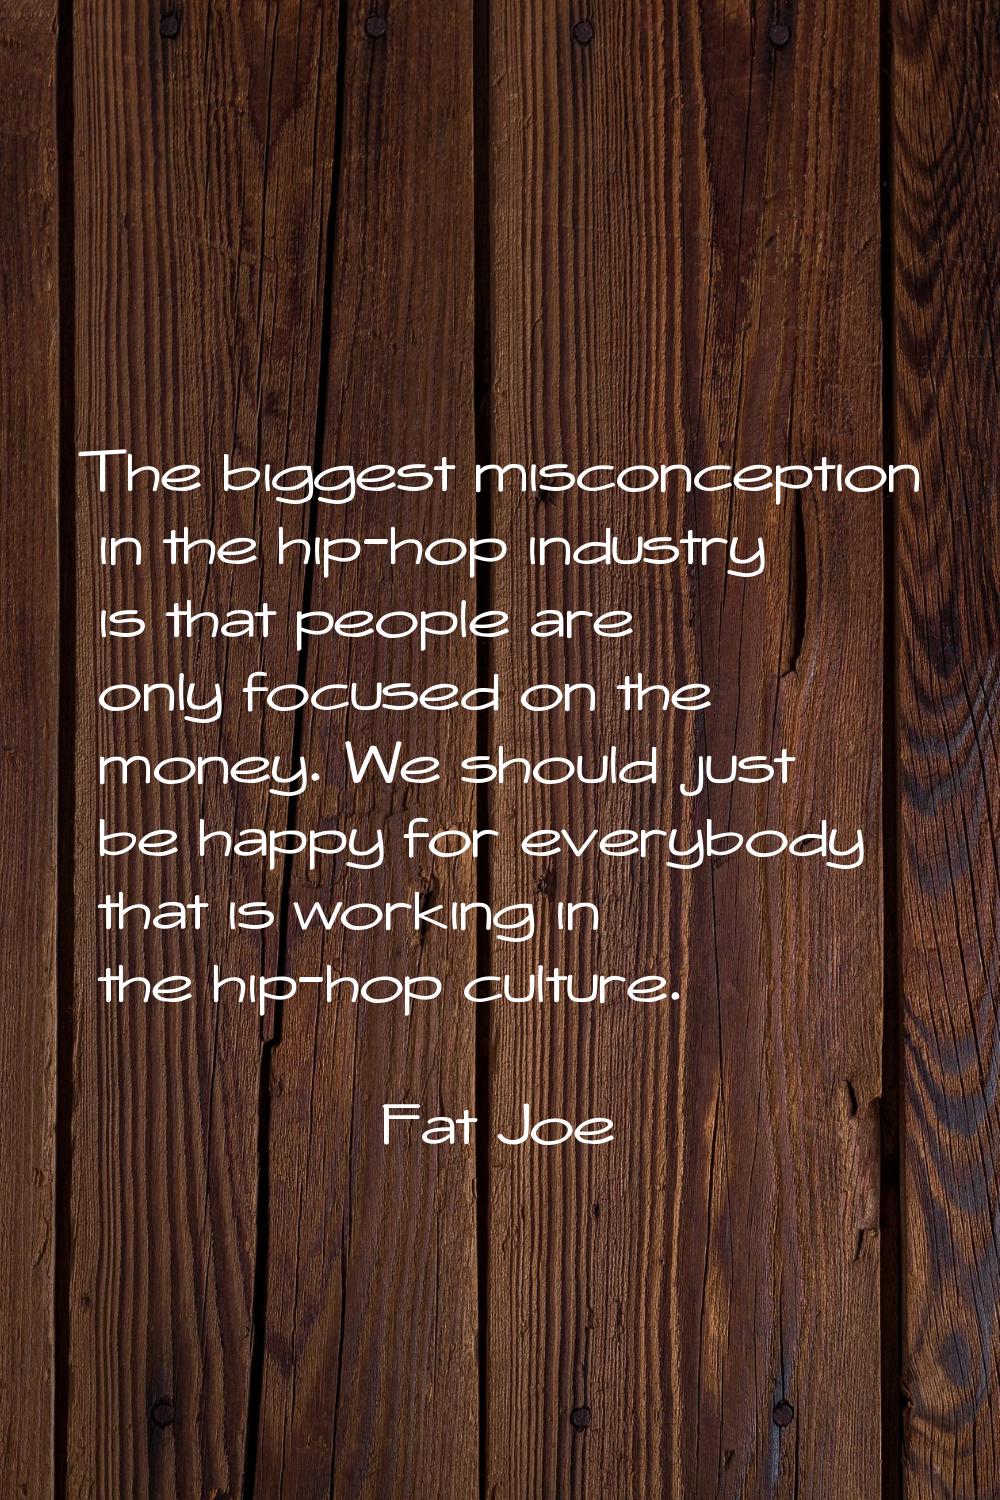 The biggest misconception in the hip-hop industry is that people are only focused on the money. We 